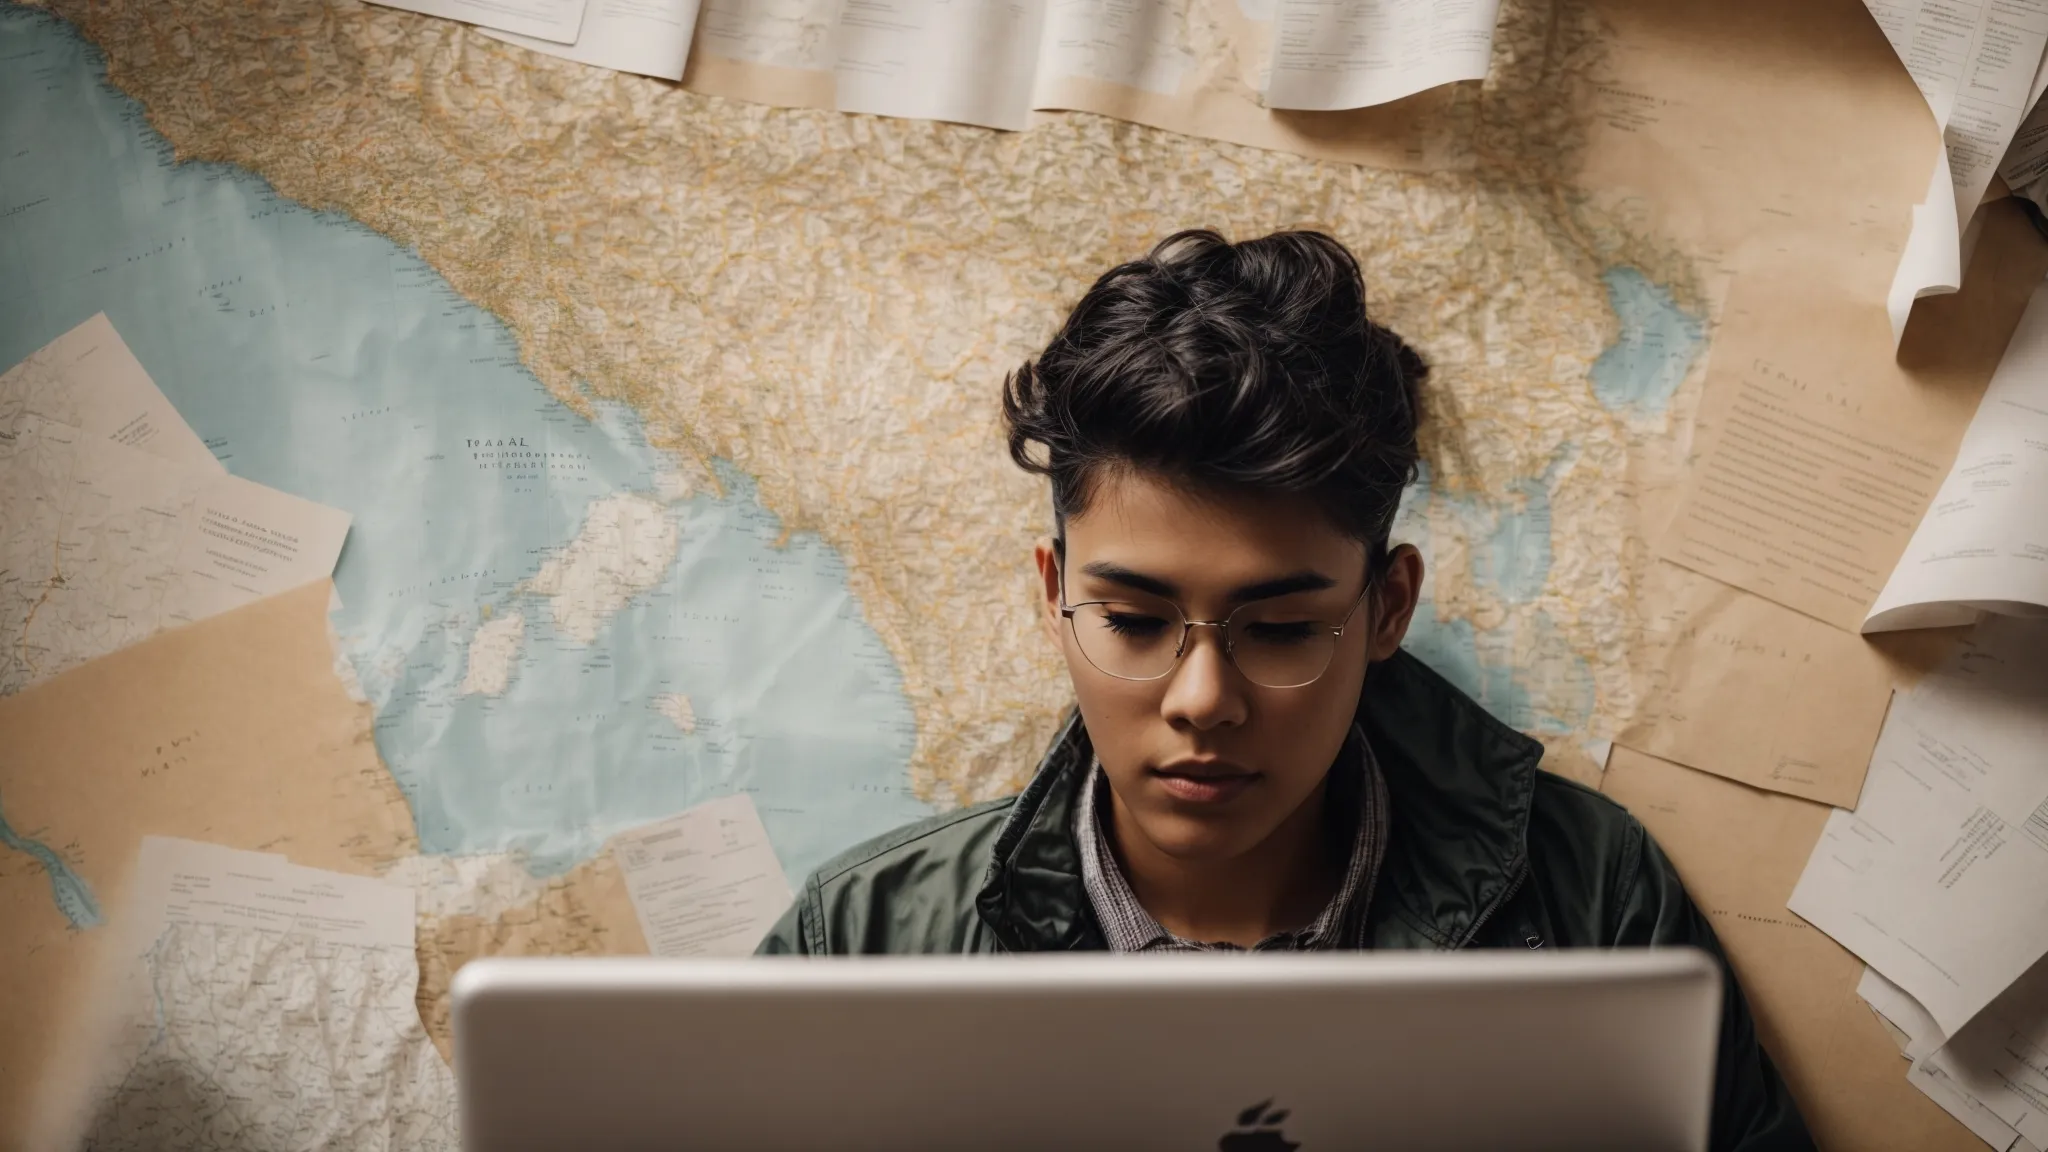 a focused individual types on a laptop, surrounded by papers and a map marked with various local landmarks.